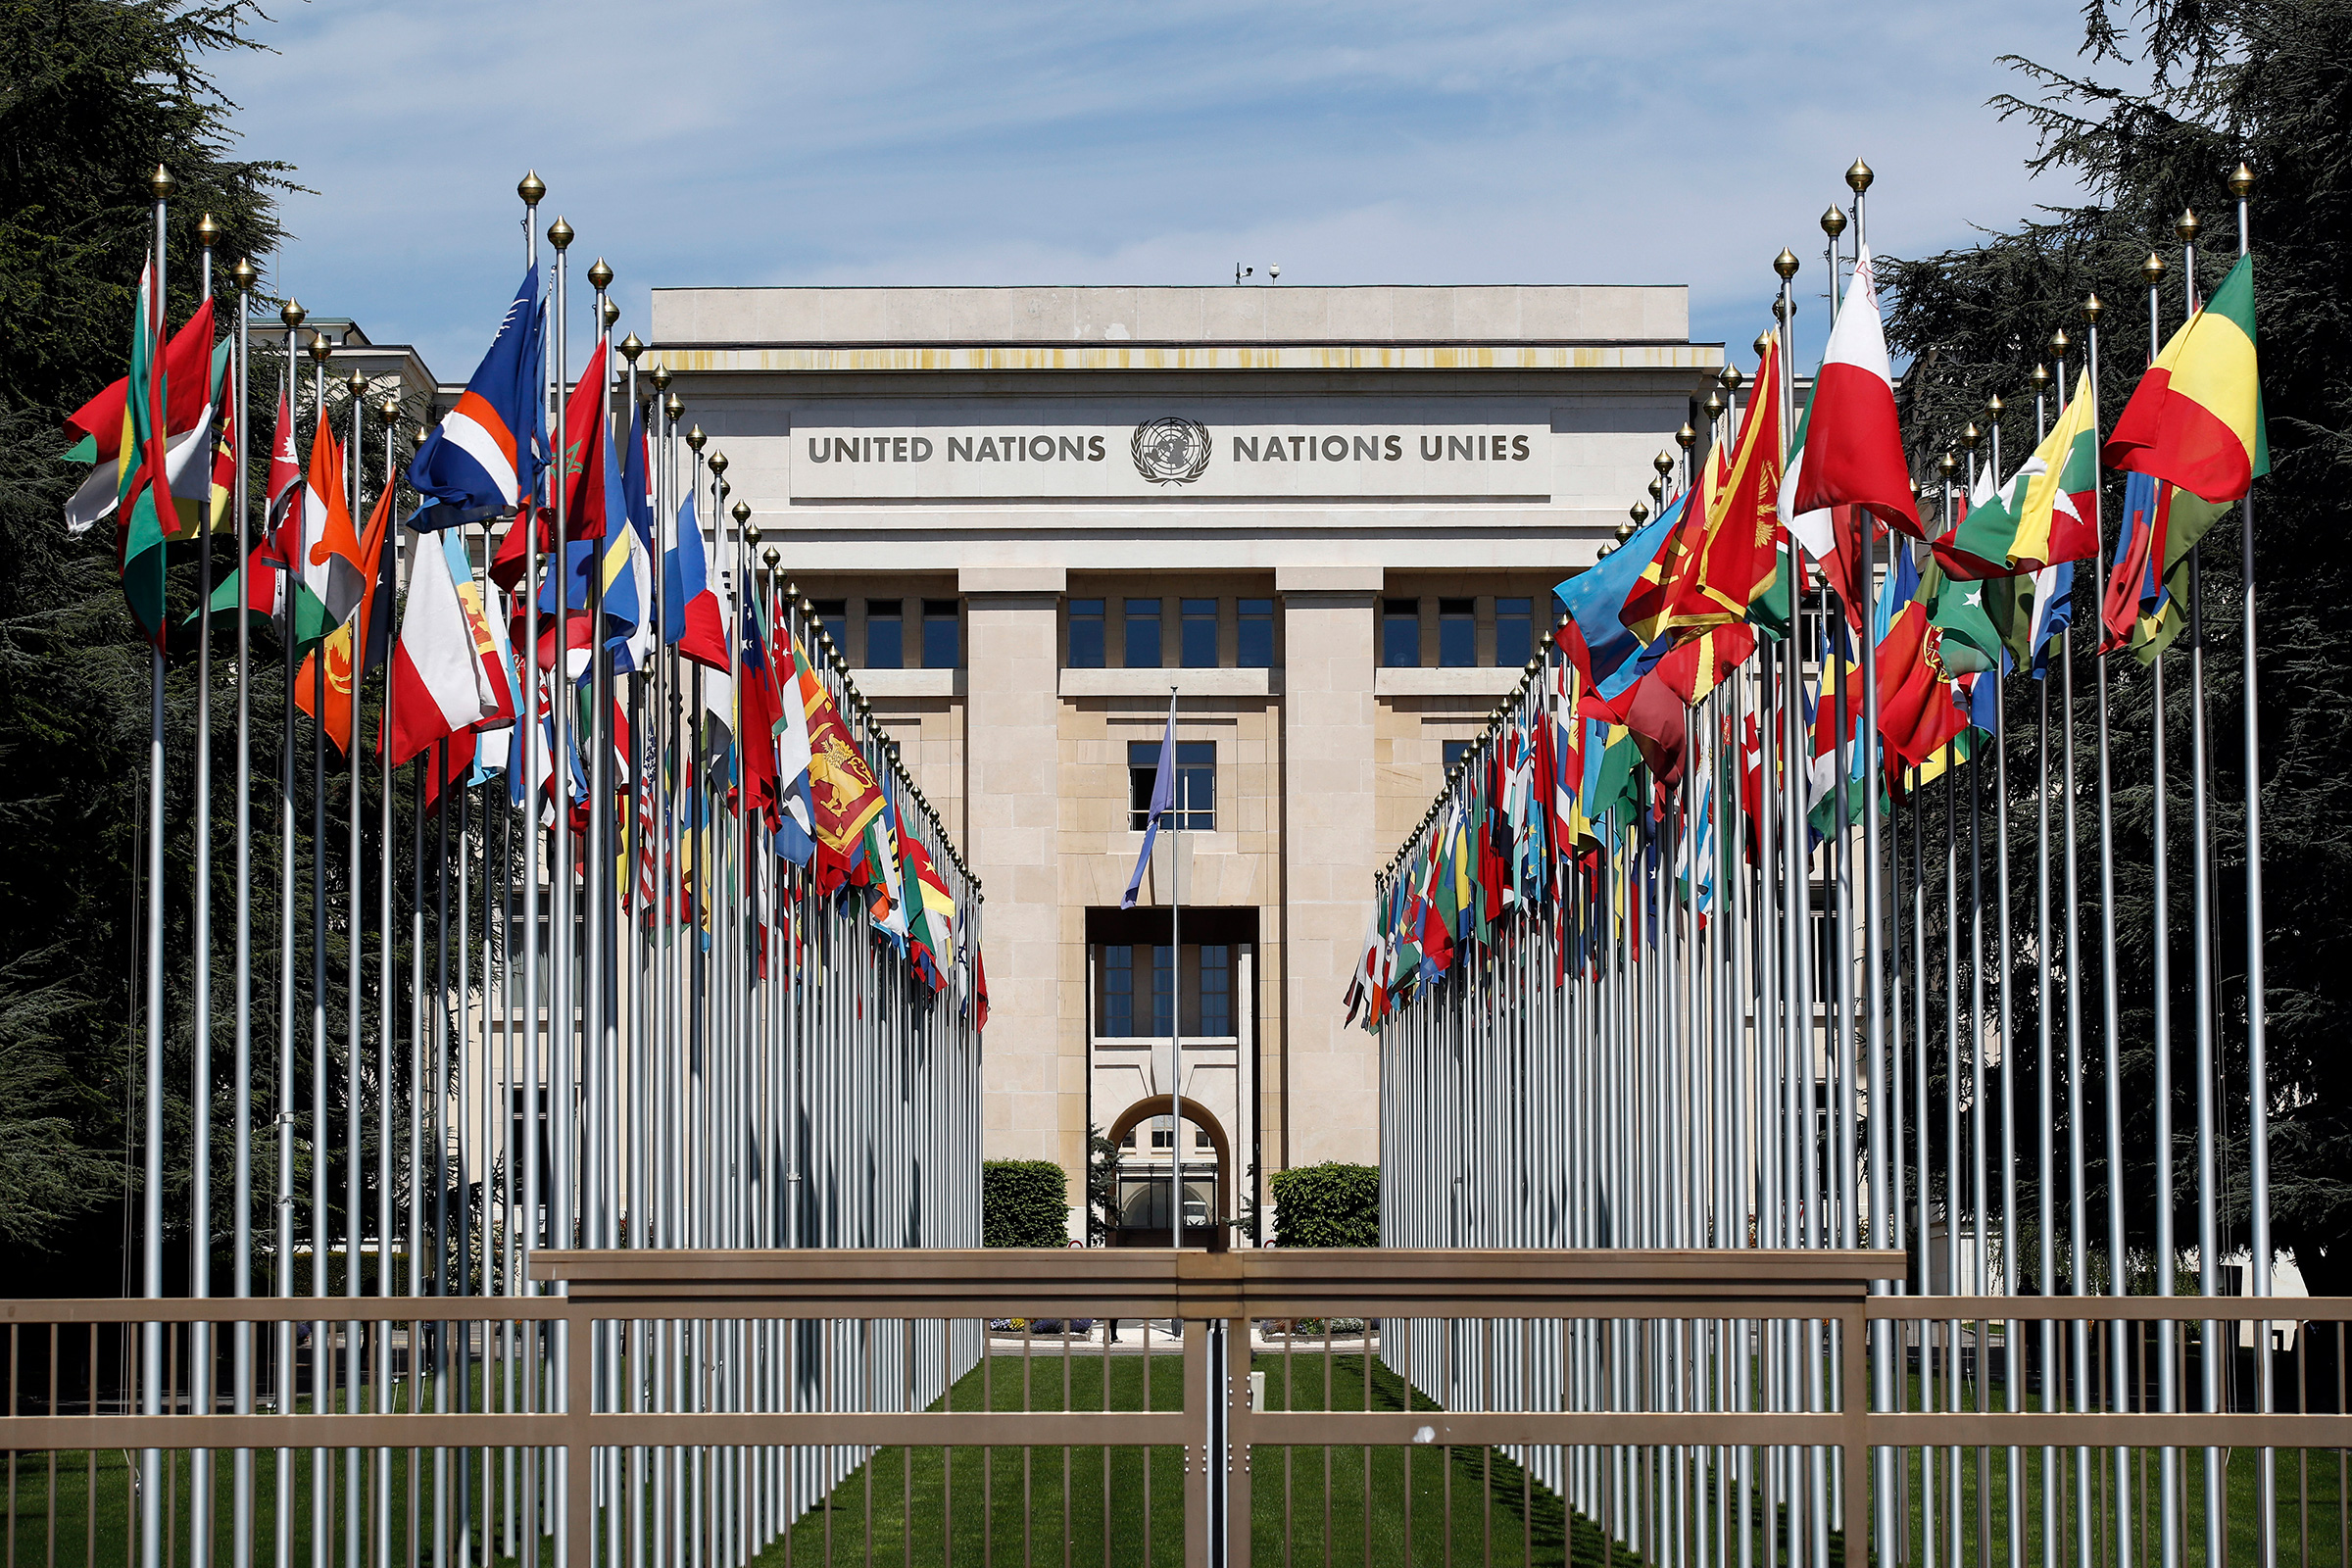 Flags stand outside the United Nations (UN) building in Geneva, Switzerland, on May 14, 2019. (Stefan Wermuth—Bloomberg/Getty Images)